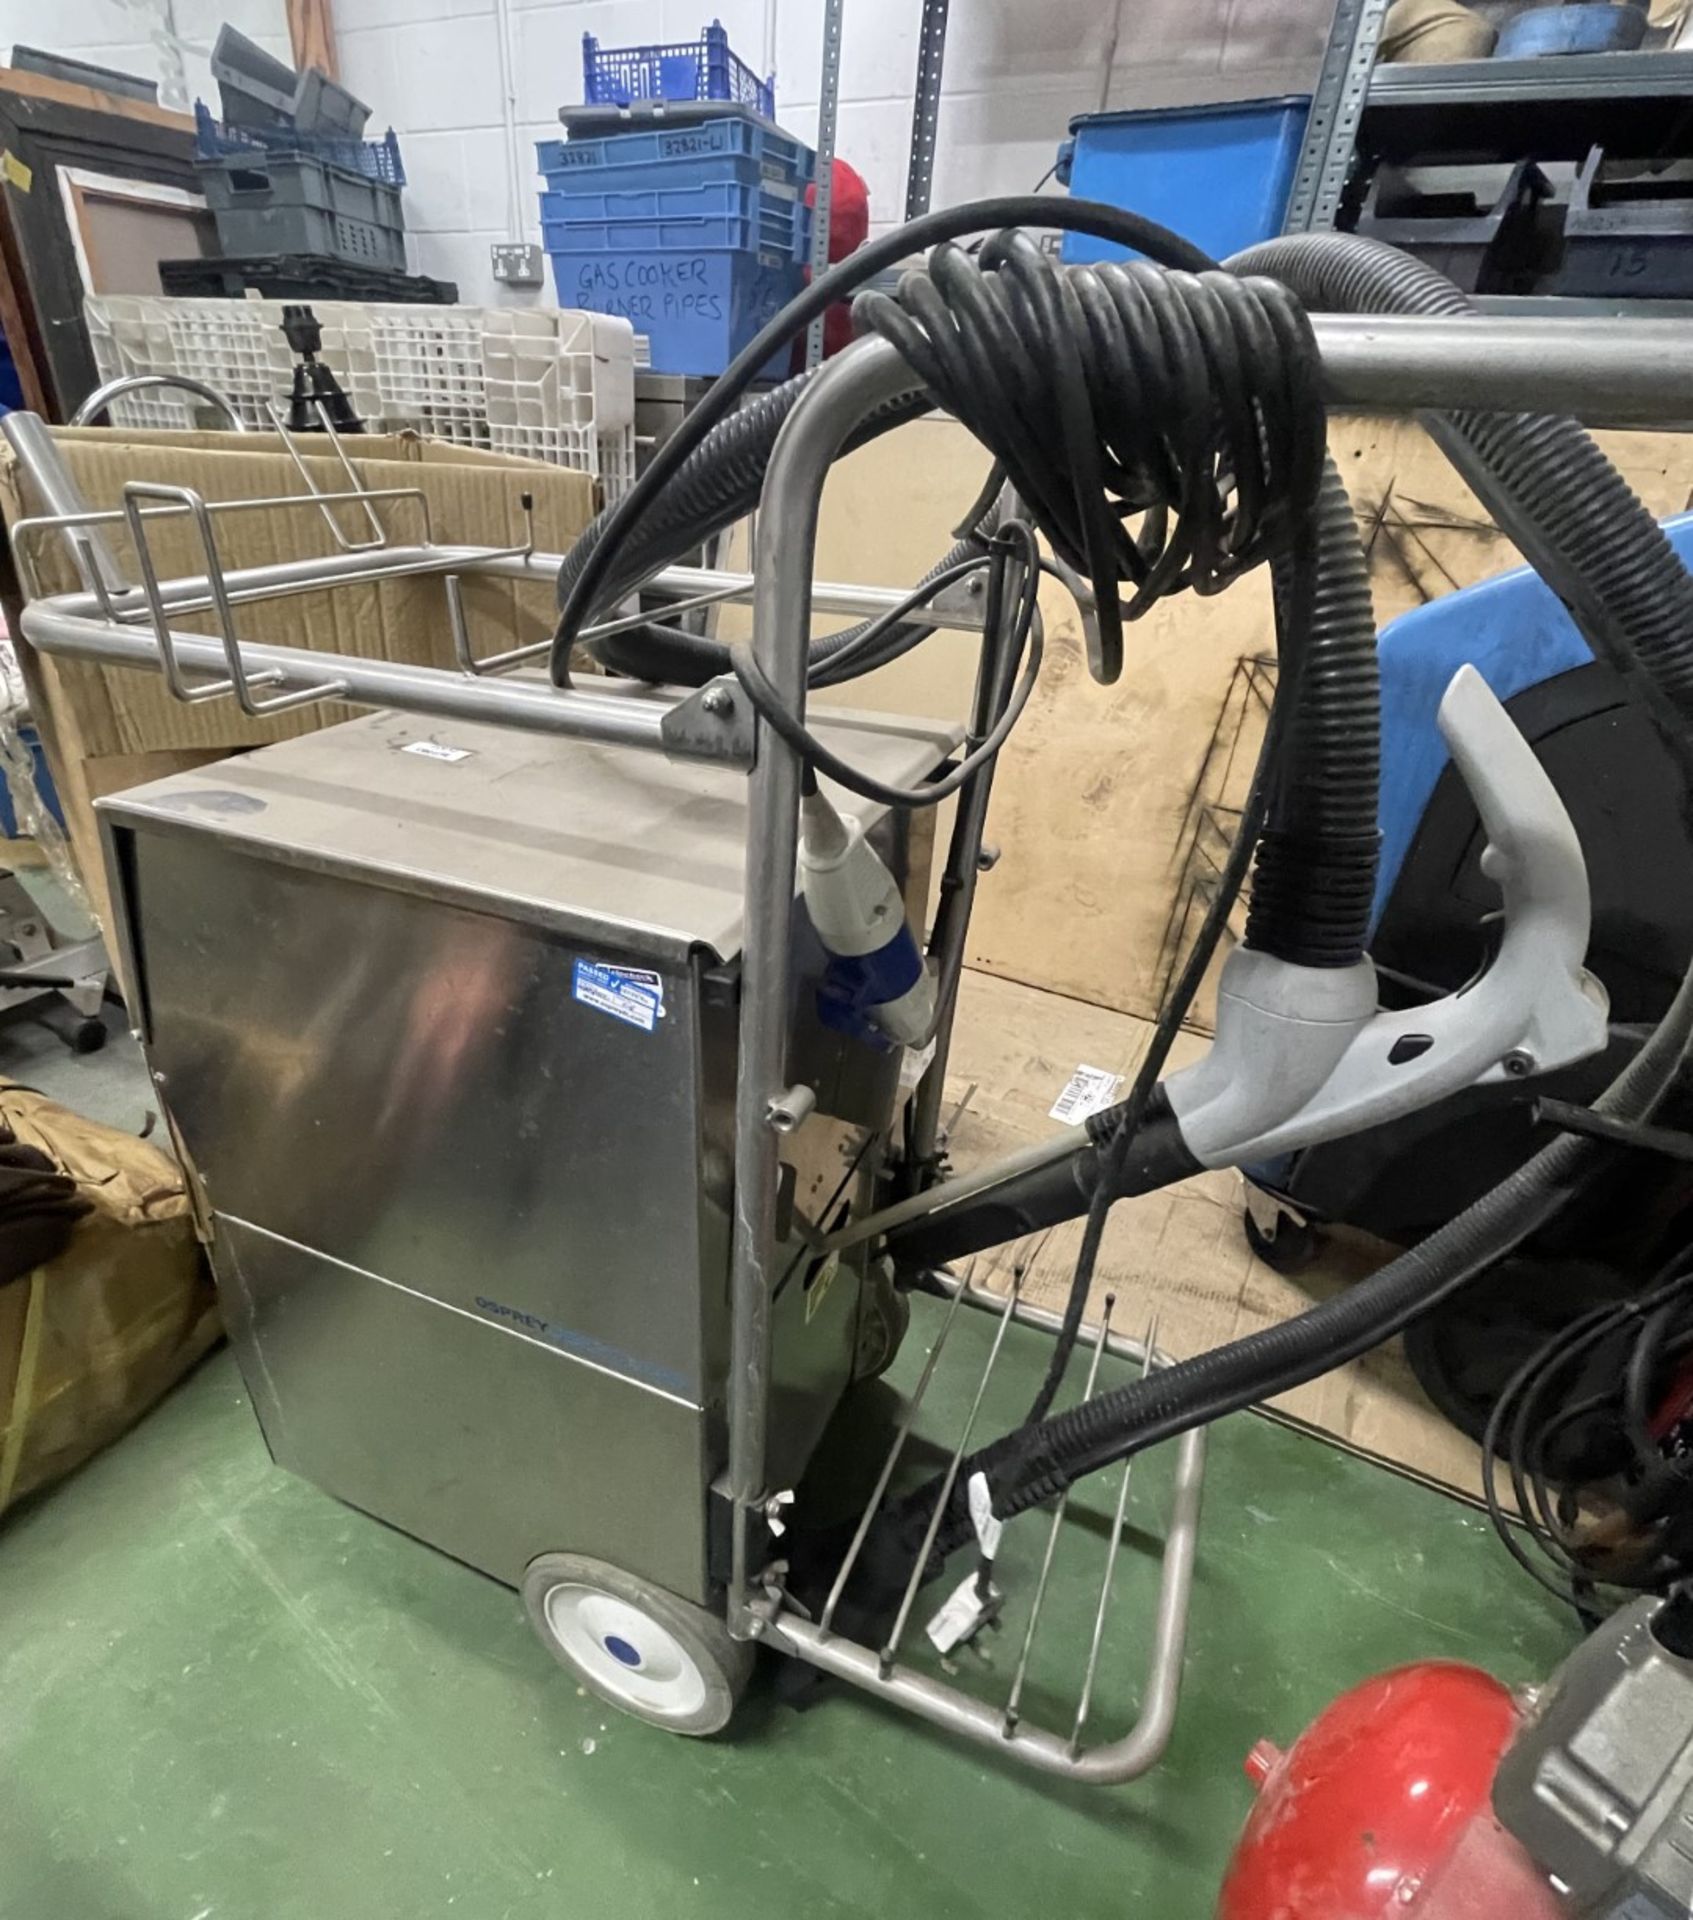 1 x Osprey Deep Clean Provap 7 VAC Steam Cleaner - Removed From a Working Environment - CL011 - Ref: - Image 3 of 9